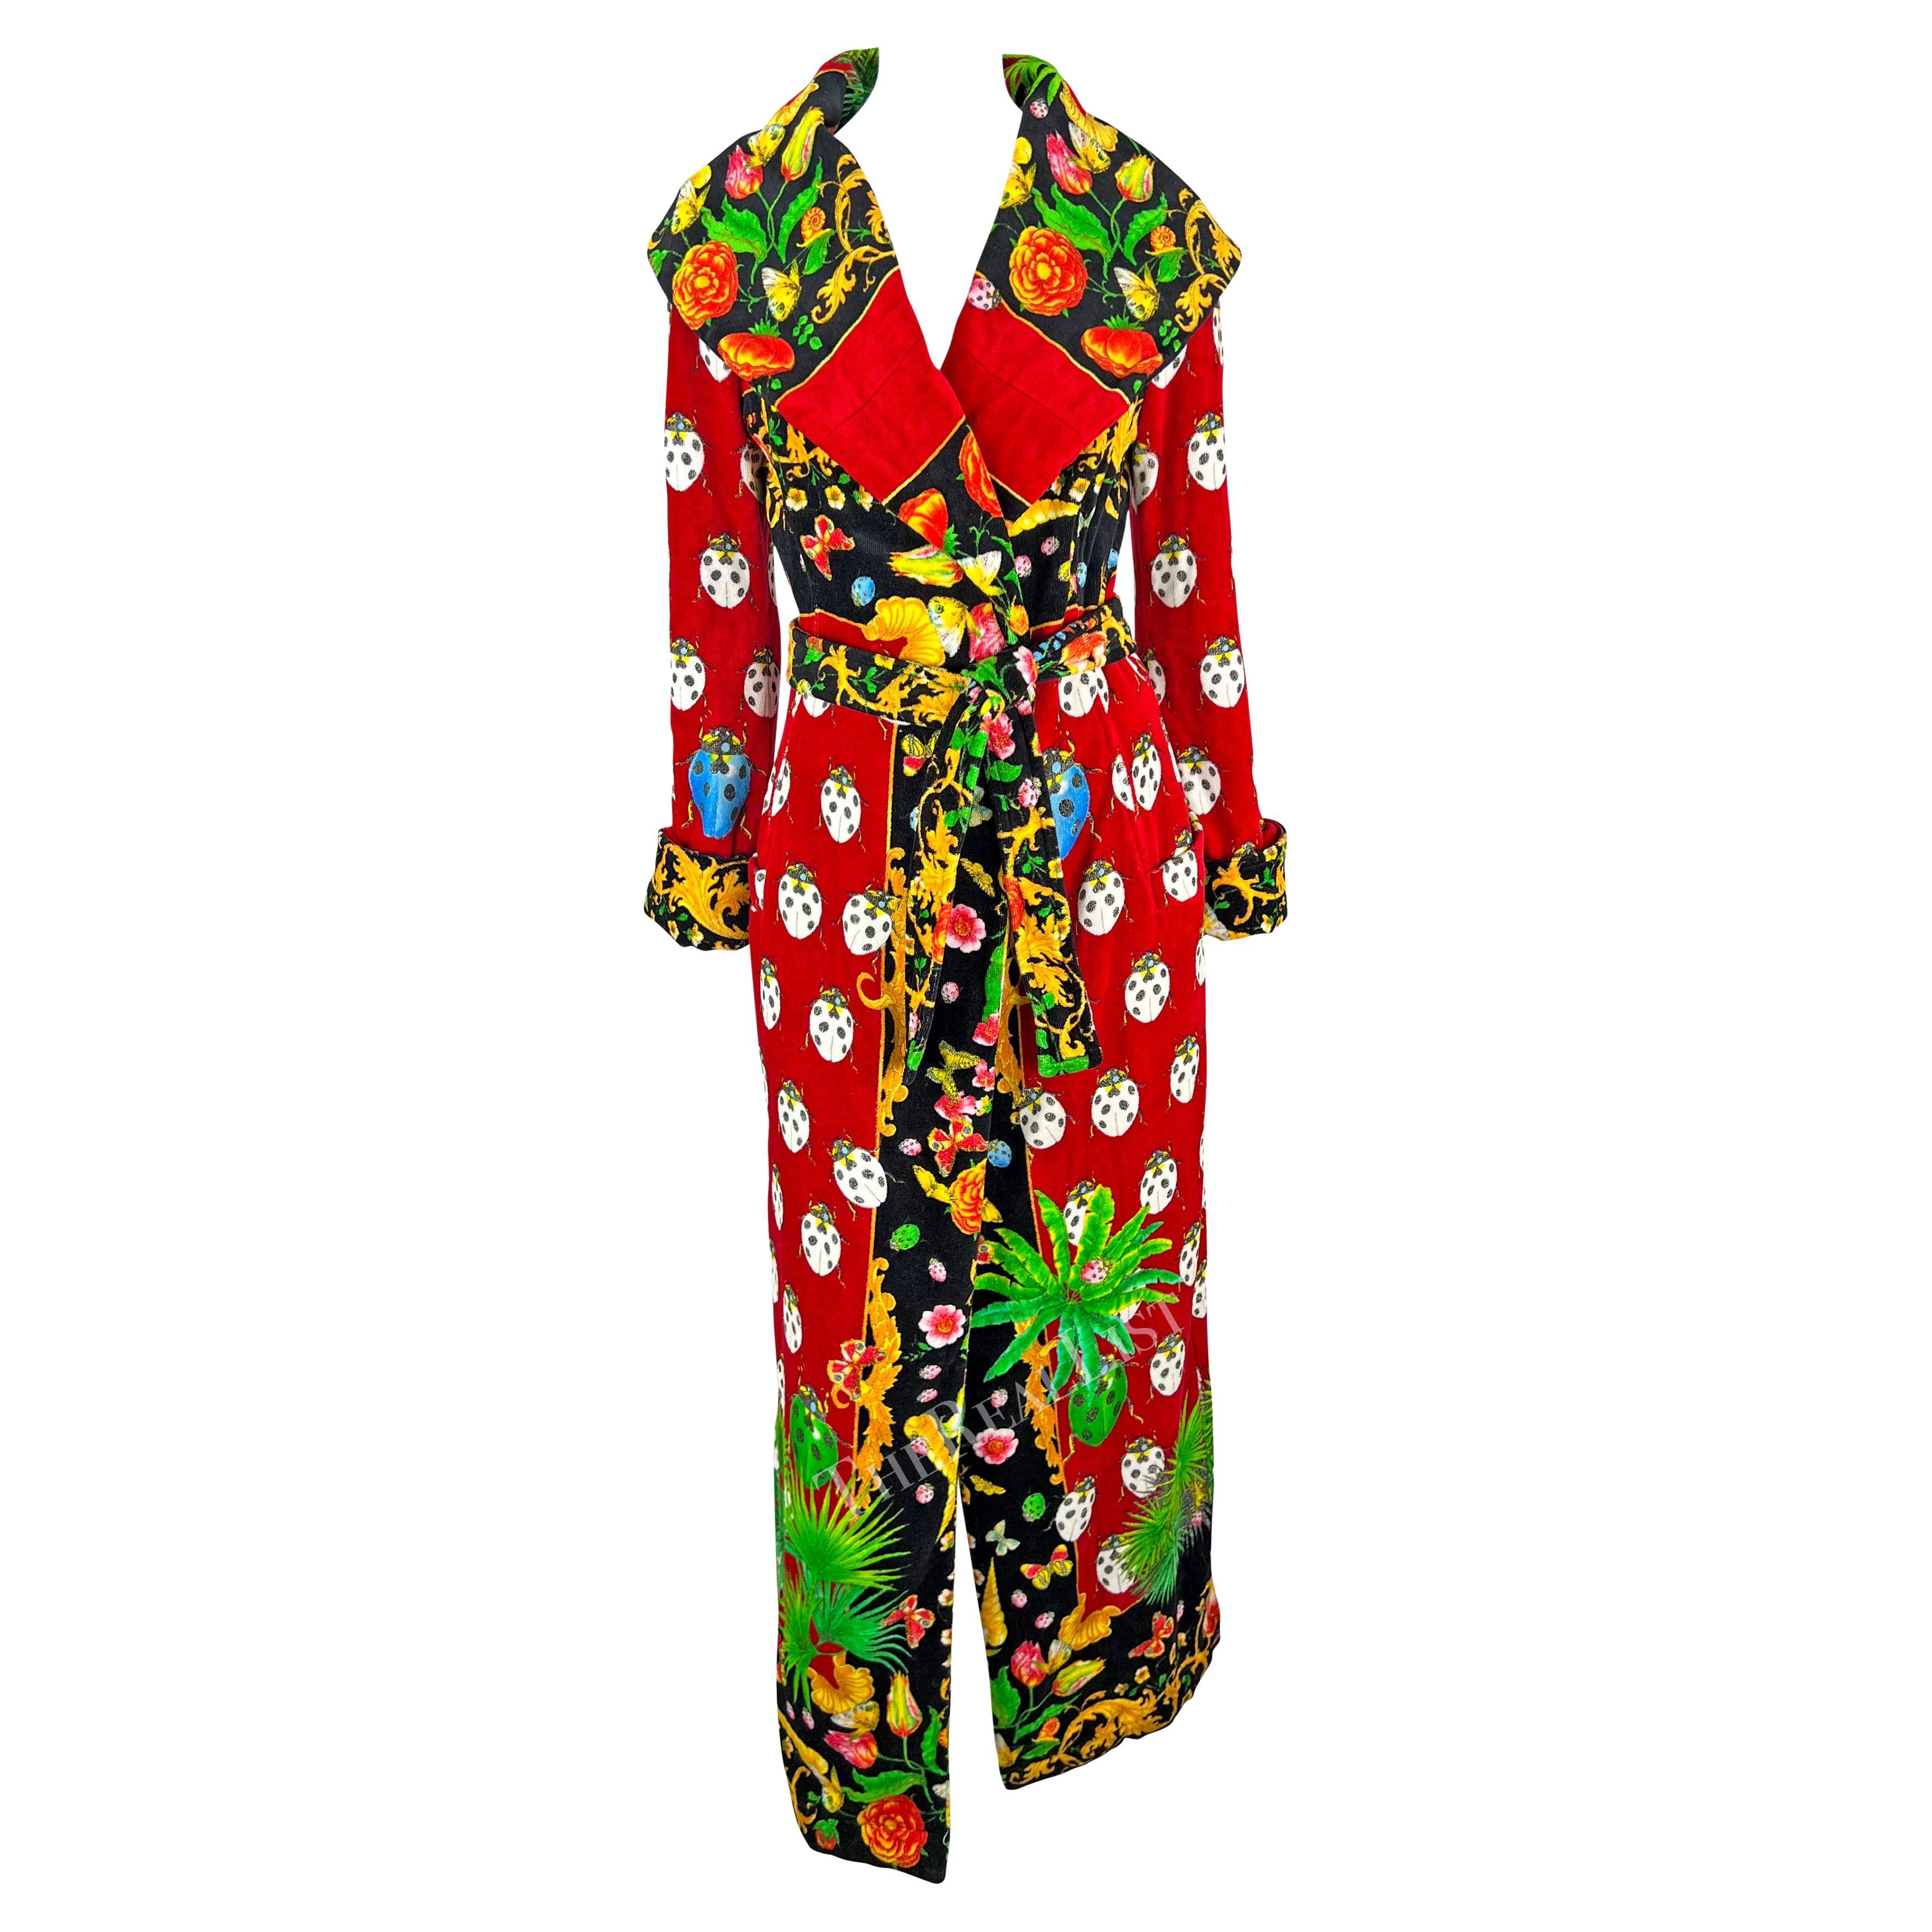 S/S 1995 Gianni Versace Red Lady Bug Print Corset Boned Terrycloth Robe